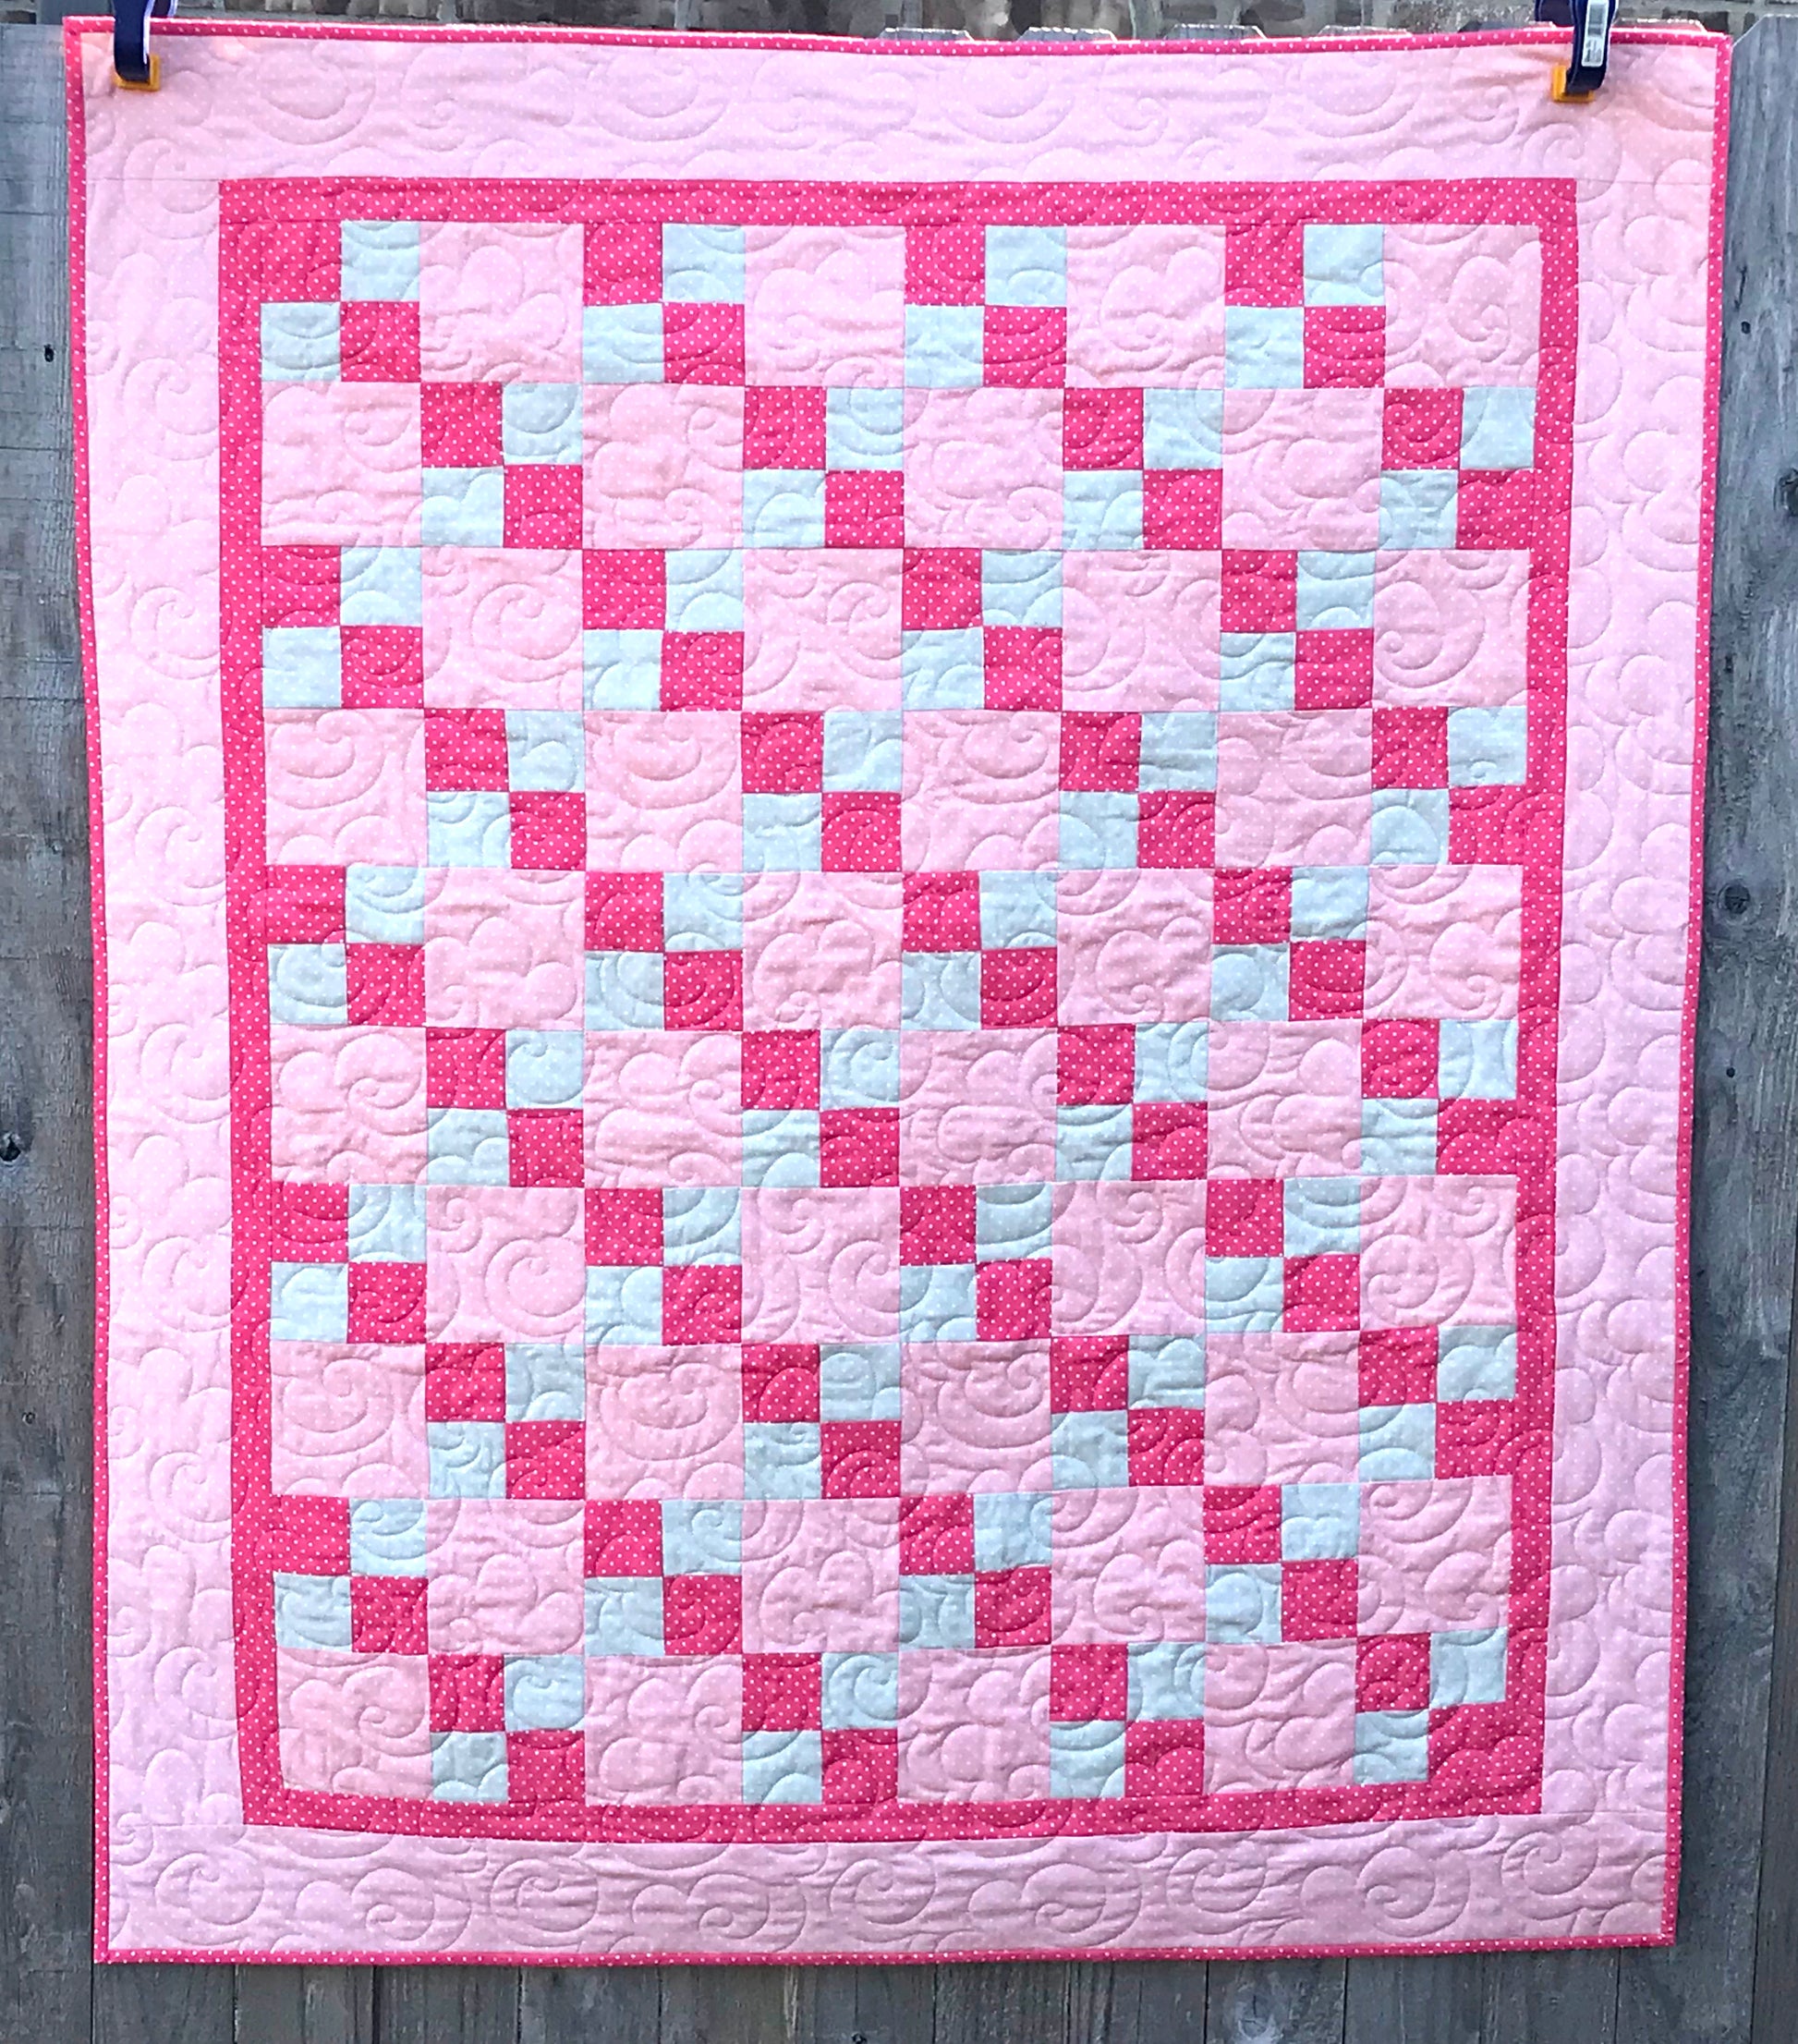 Four-Patch Quilt Patterns For Beginners